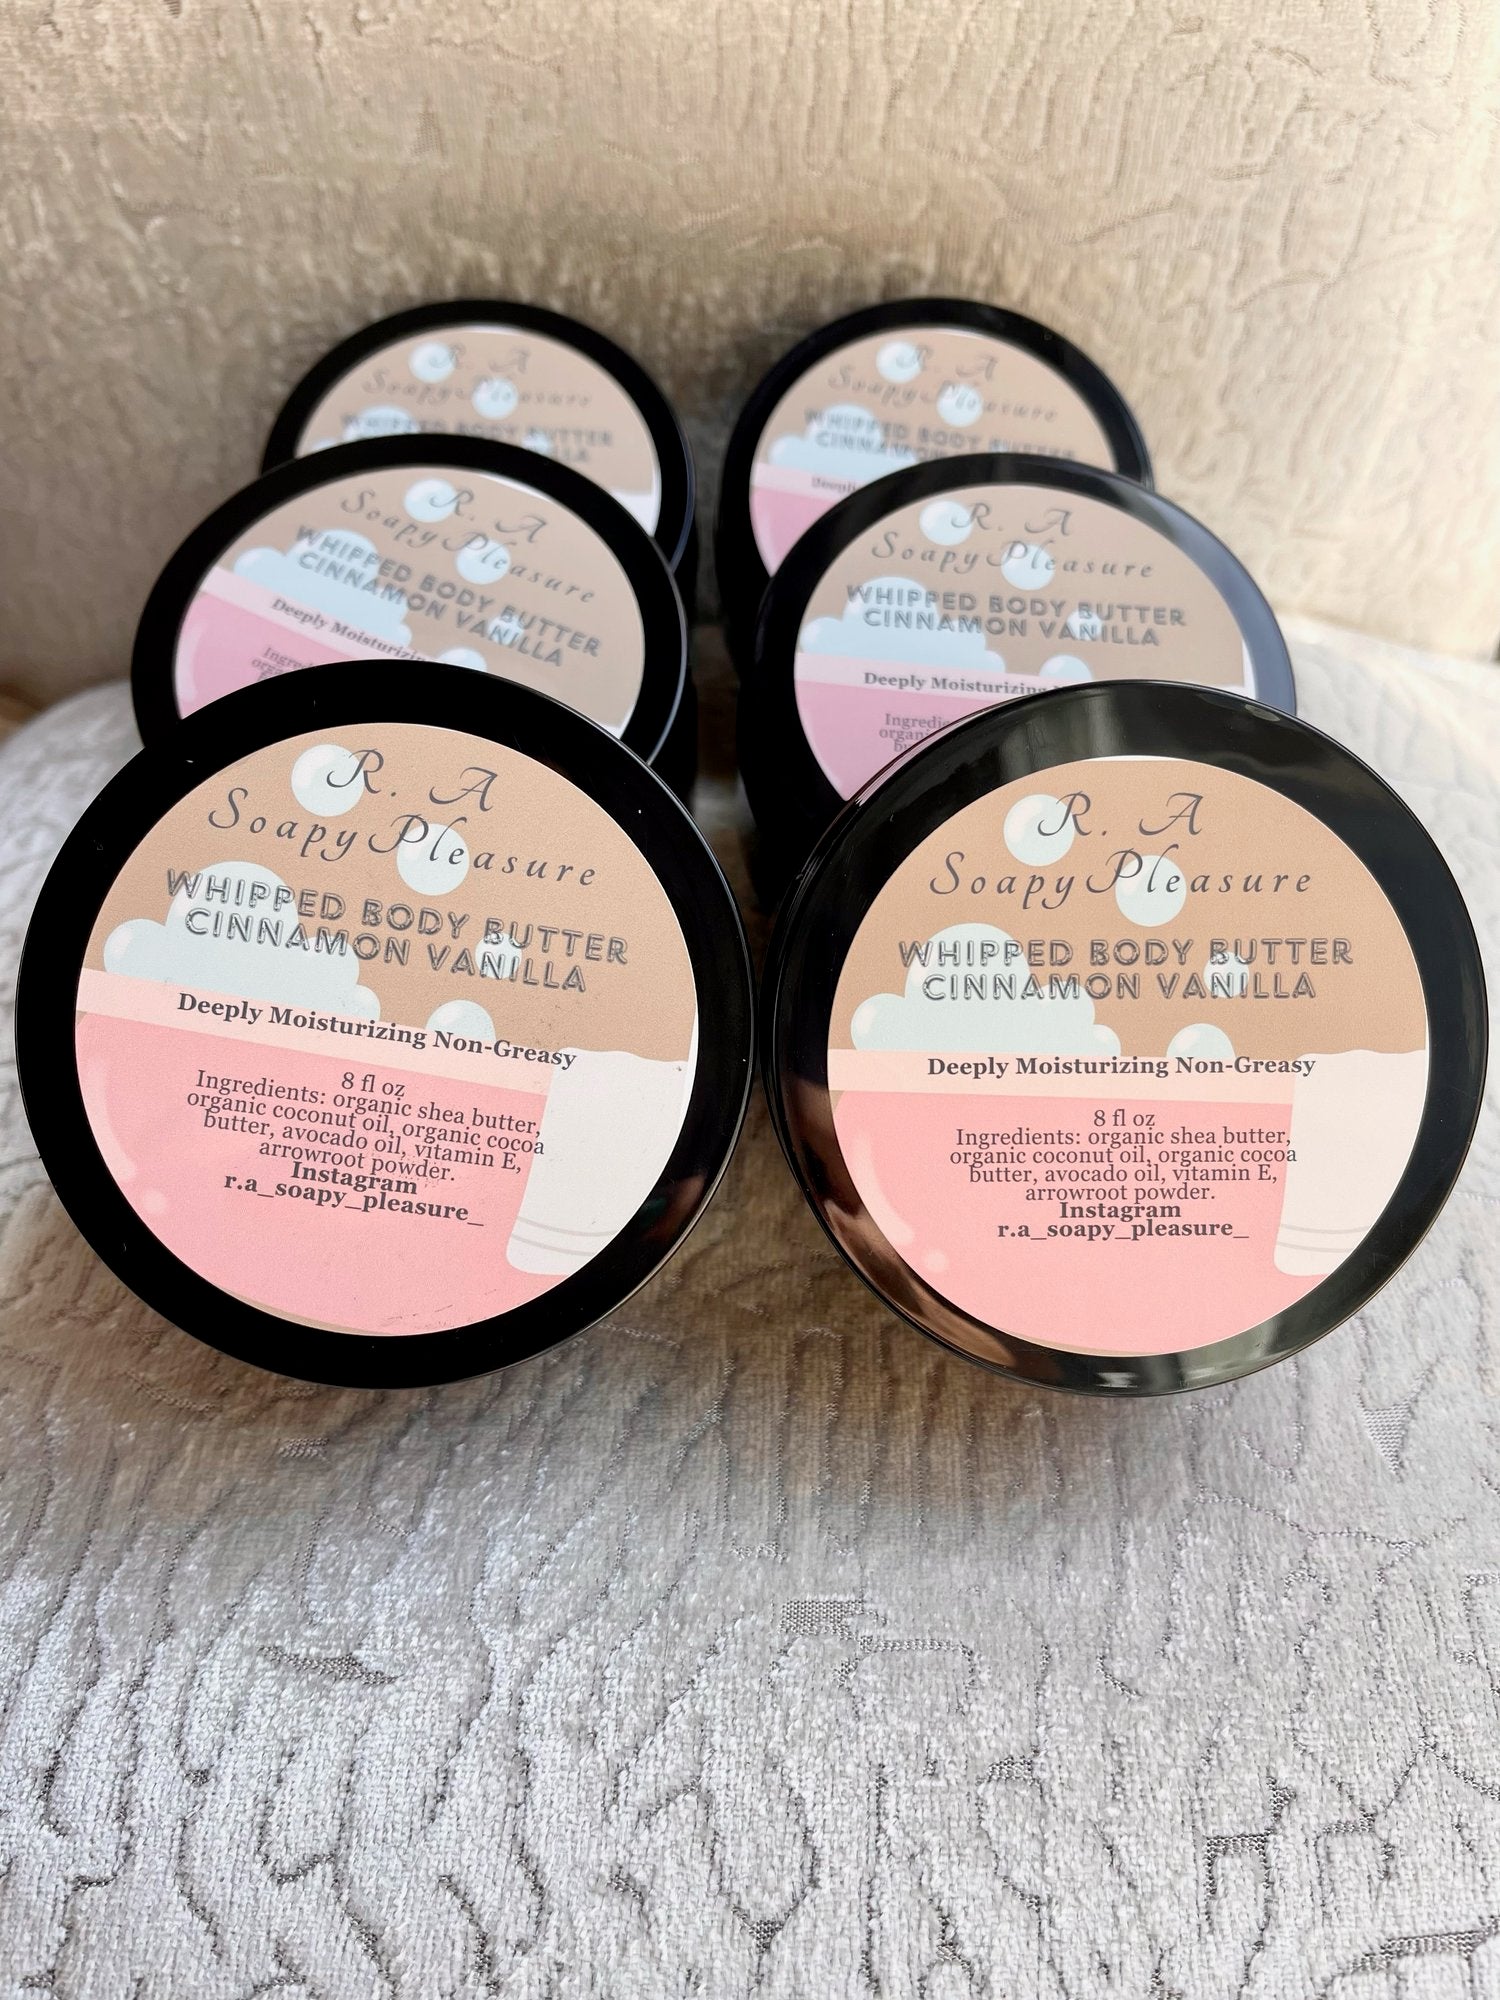 Whipped Body Butter R.A. Soapy Pleasure